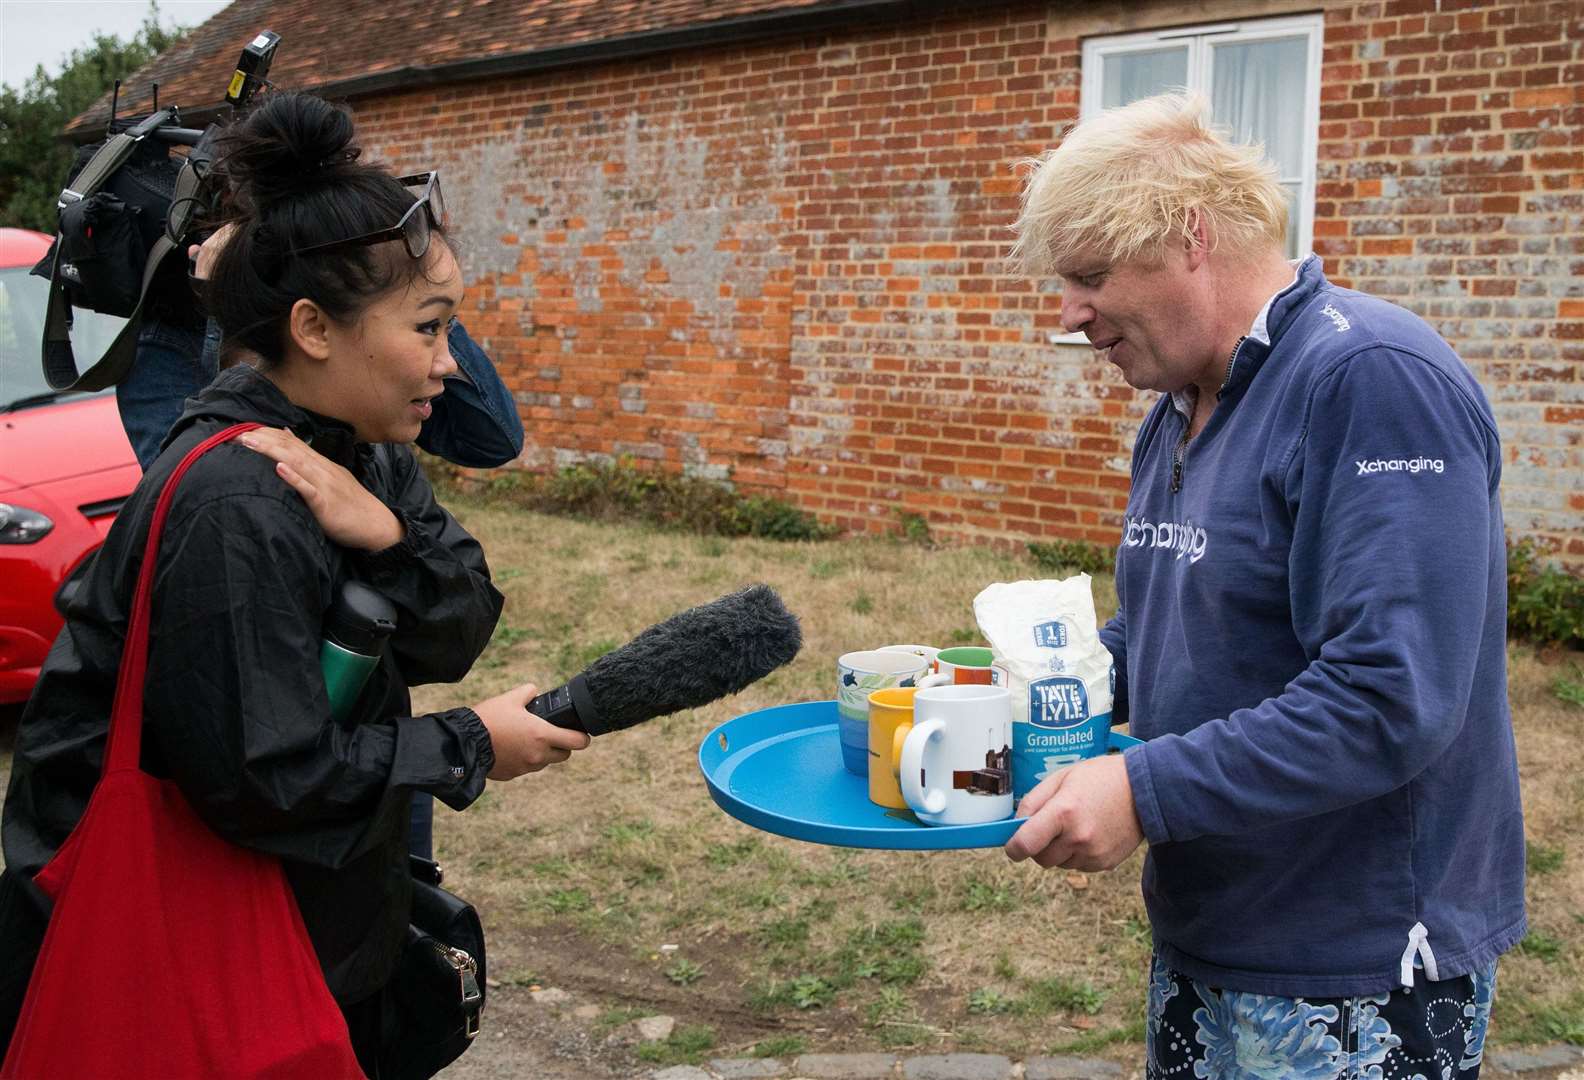 Boris Johnson brings tea for the press to drink outside his house in Thame in August 2018 (Aaron Chown/PA)